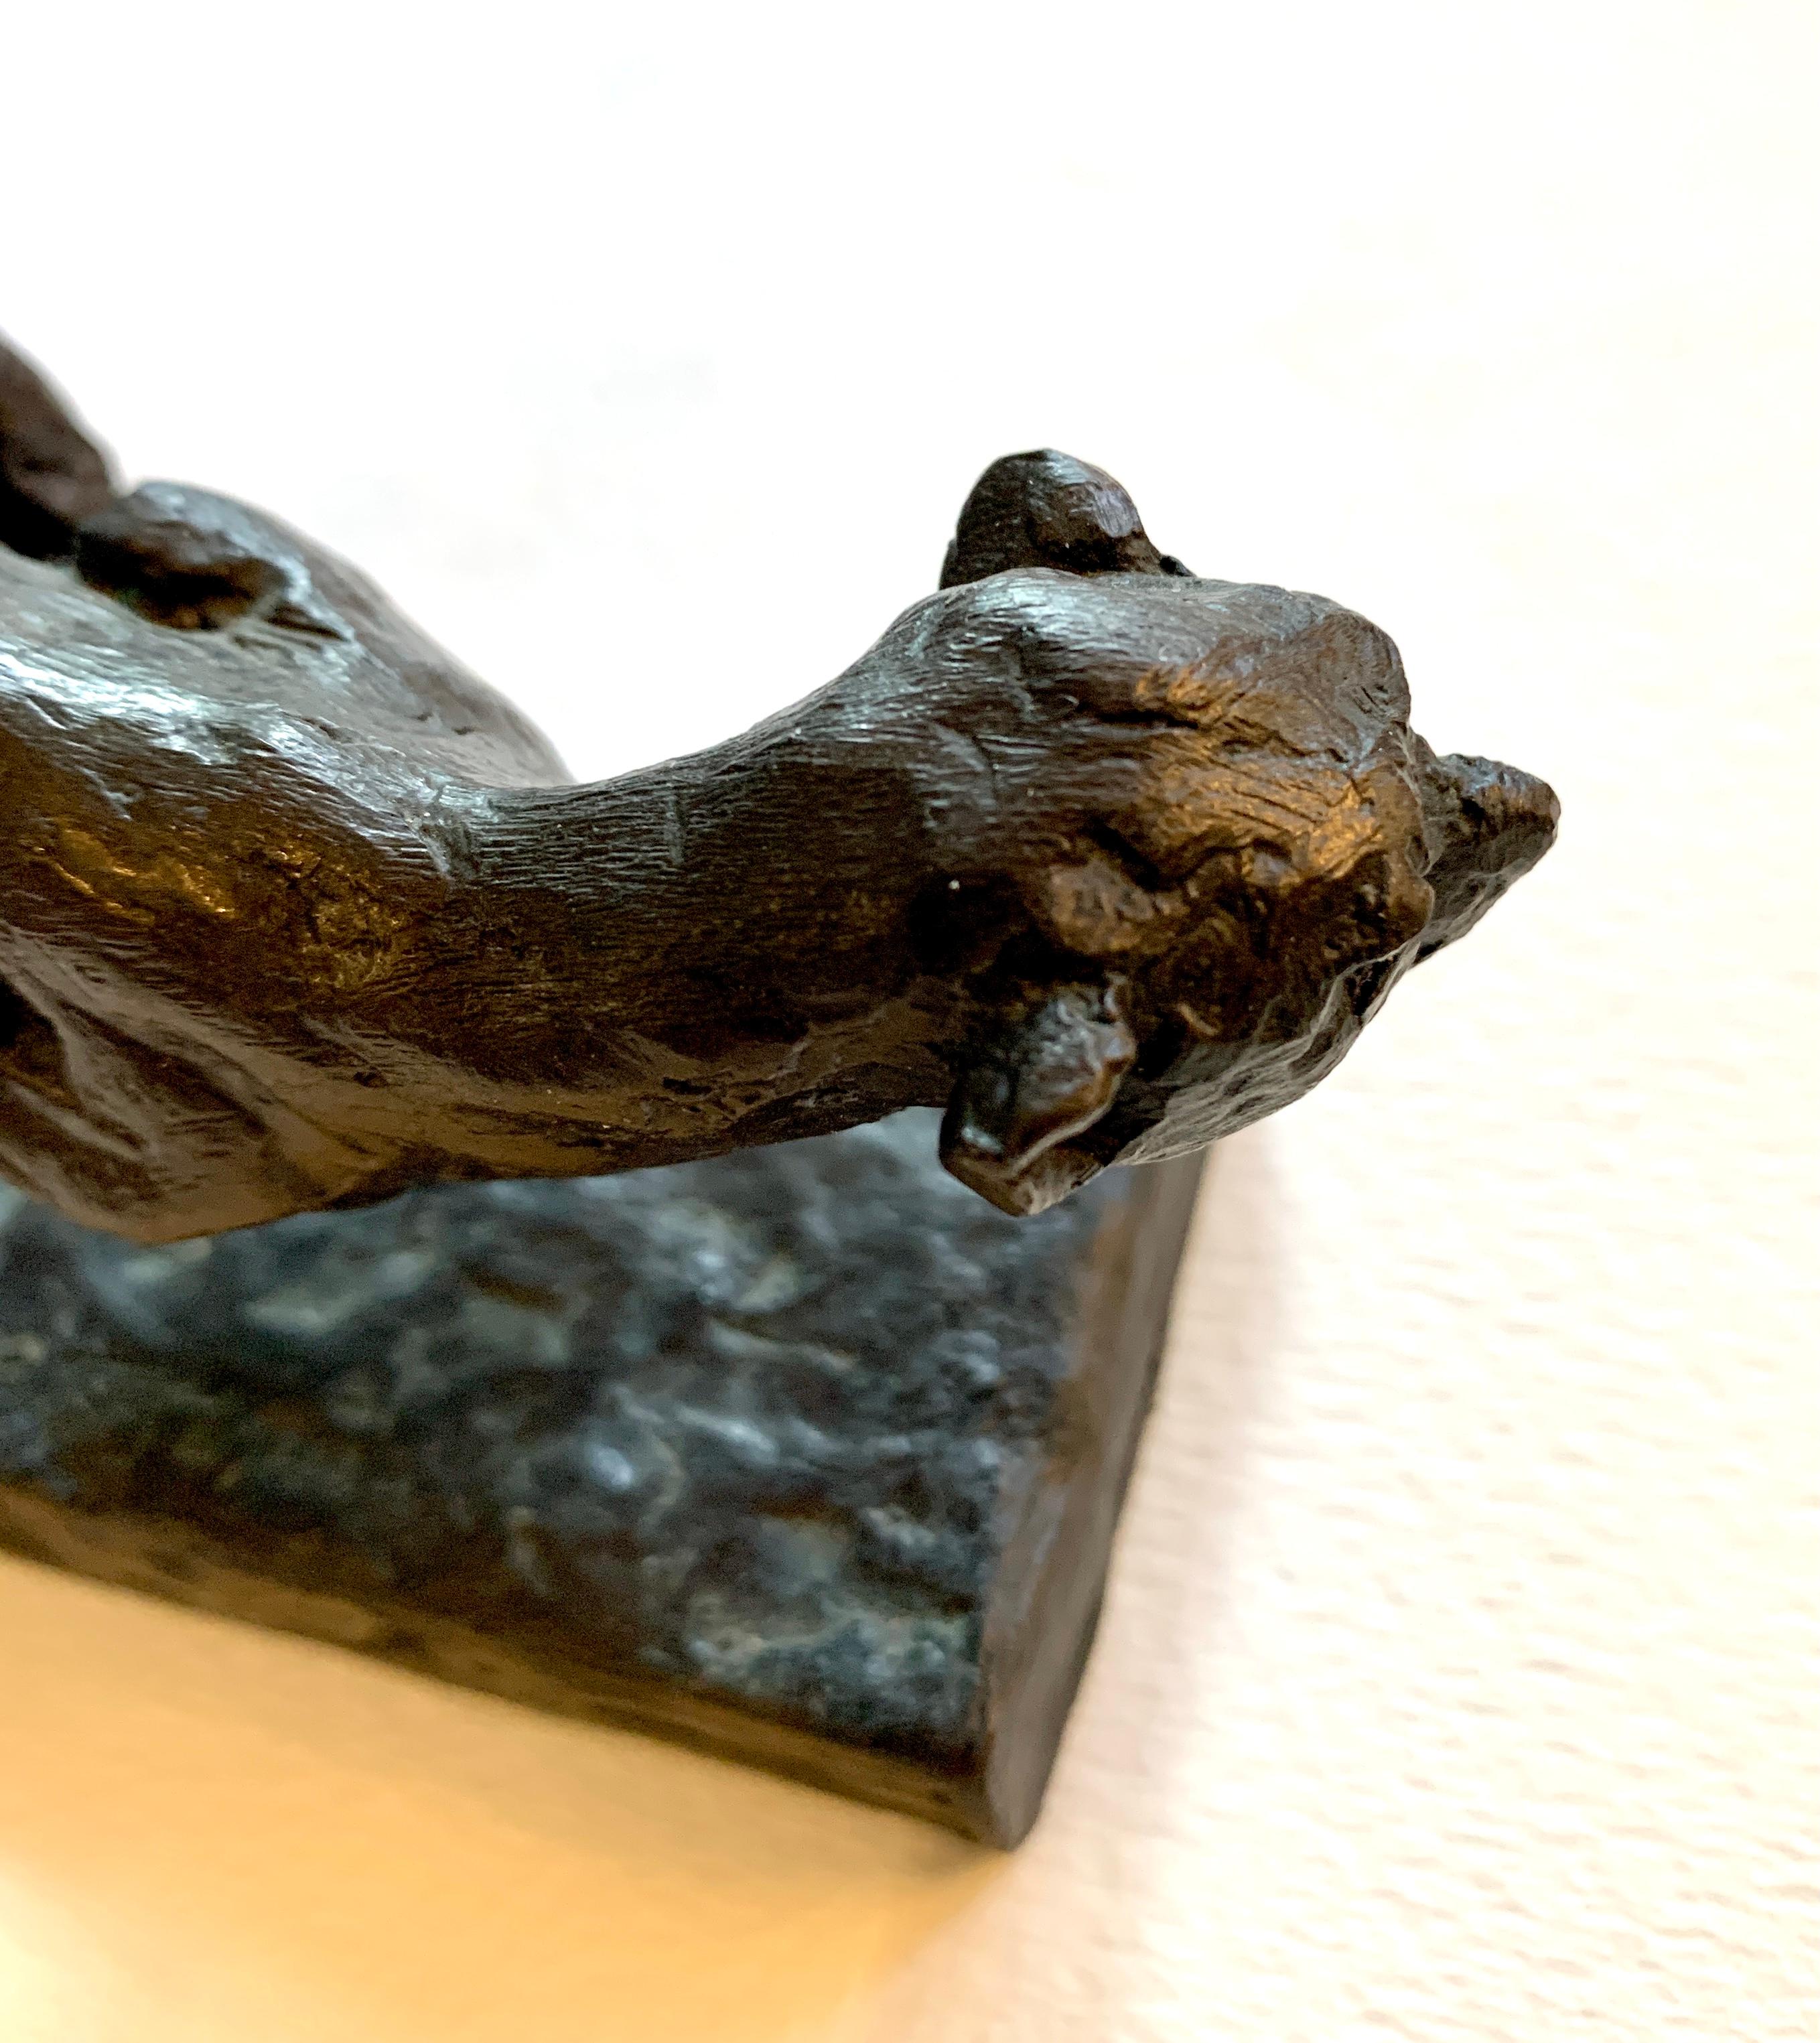 English 20th century limited edition Bronze of a running Cheetah - Realist Sculpture by Jonathan Sanders